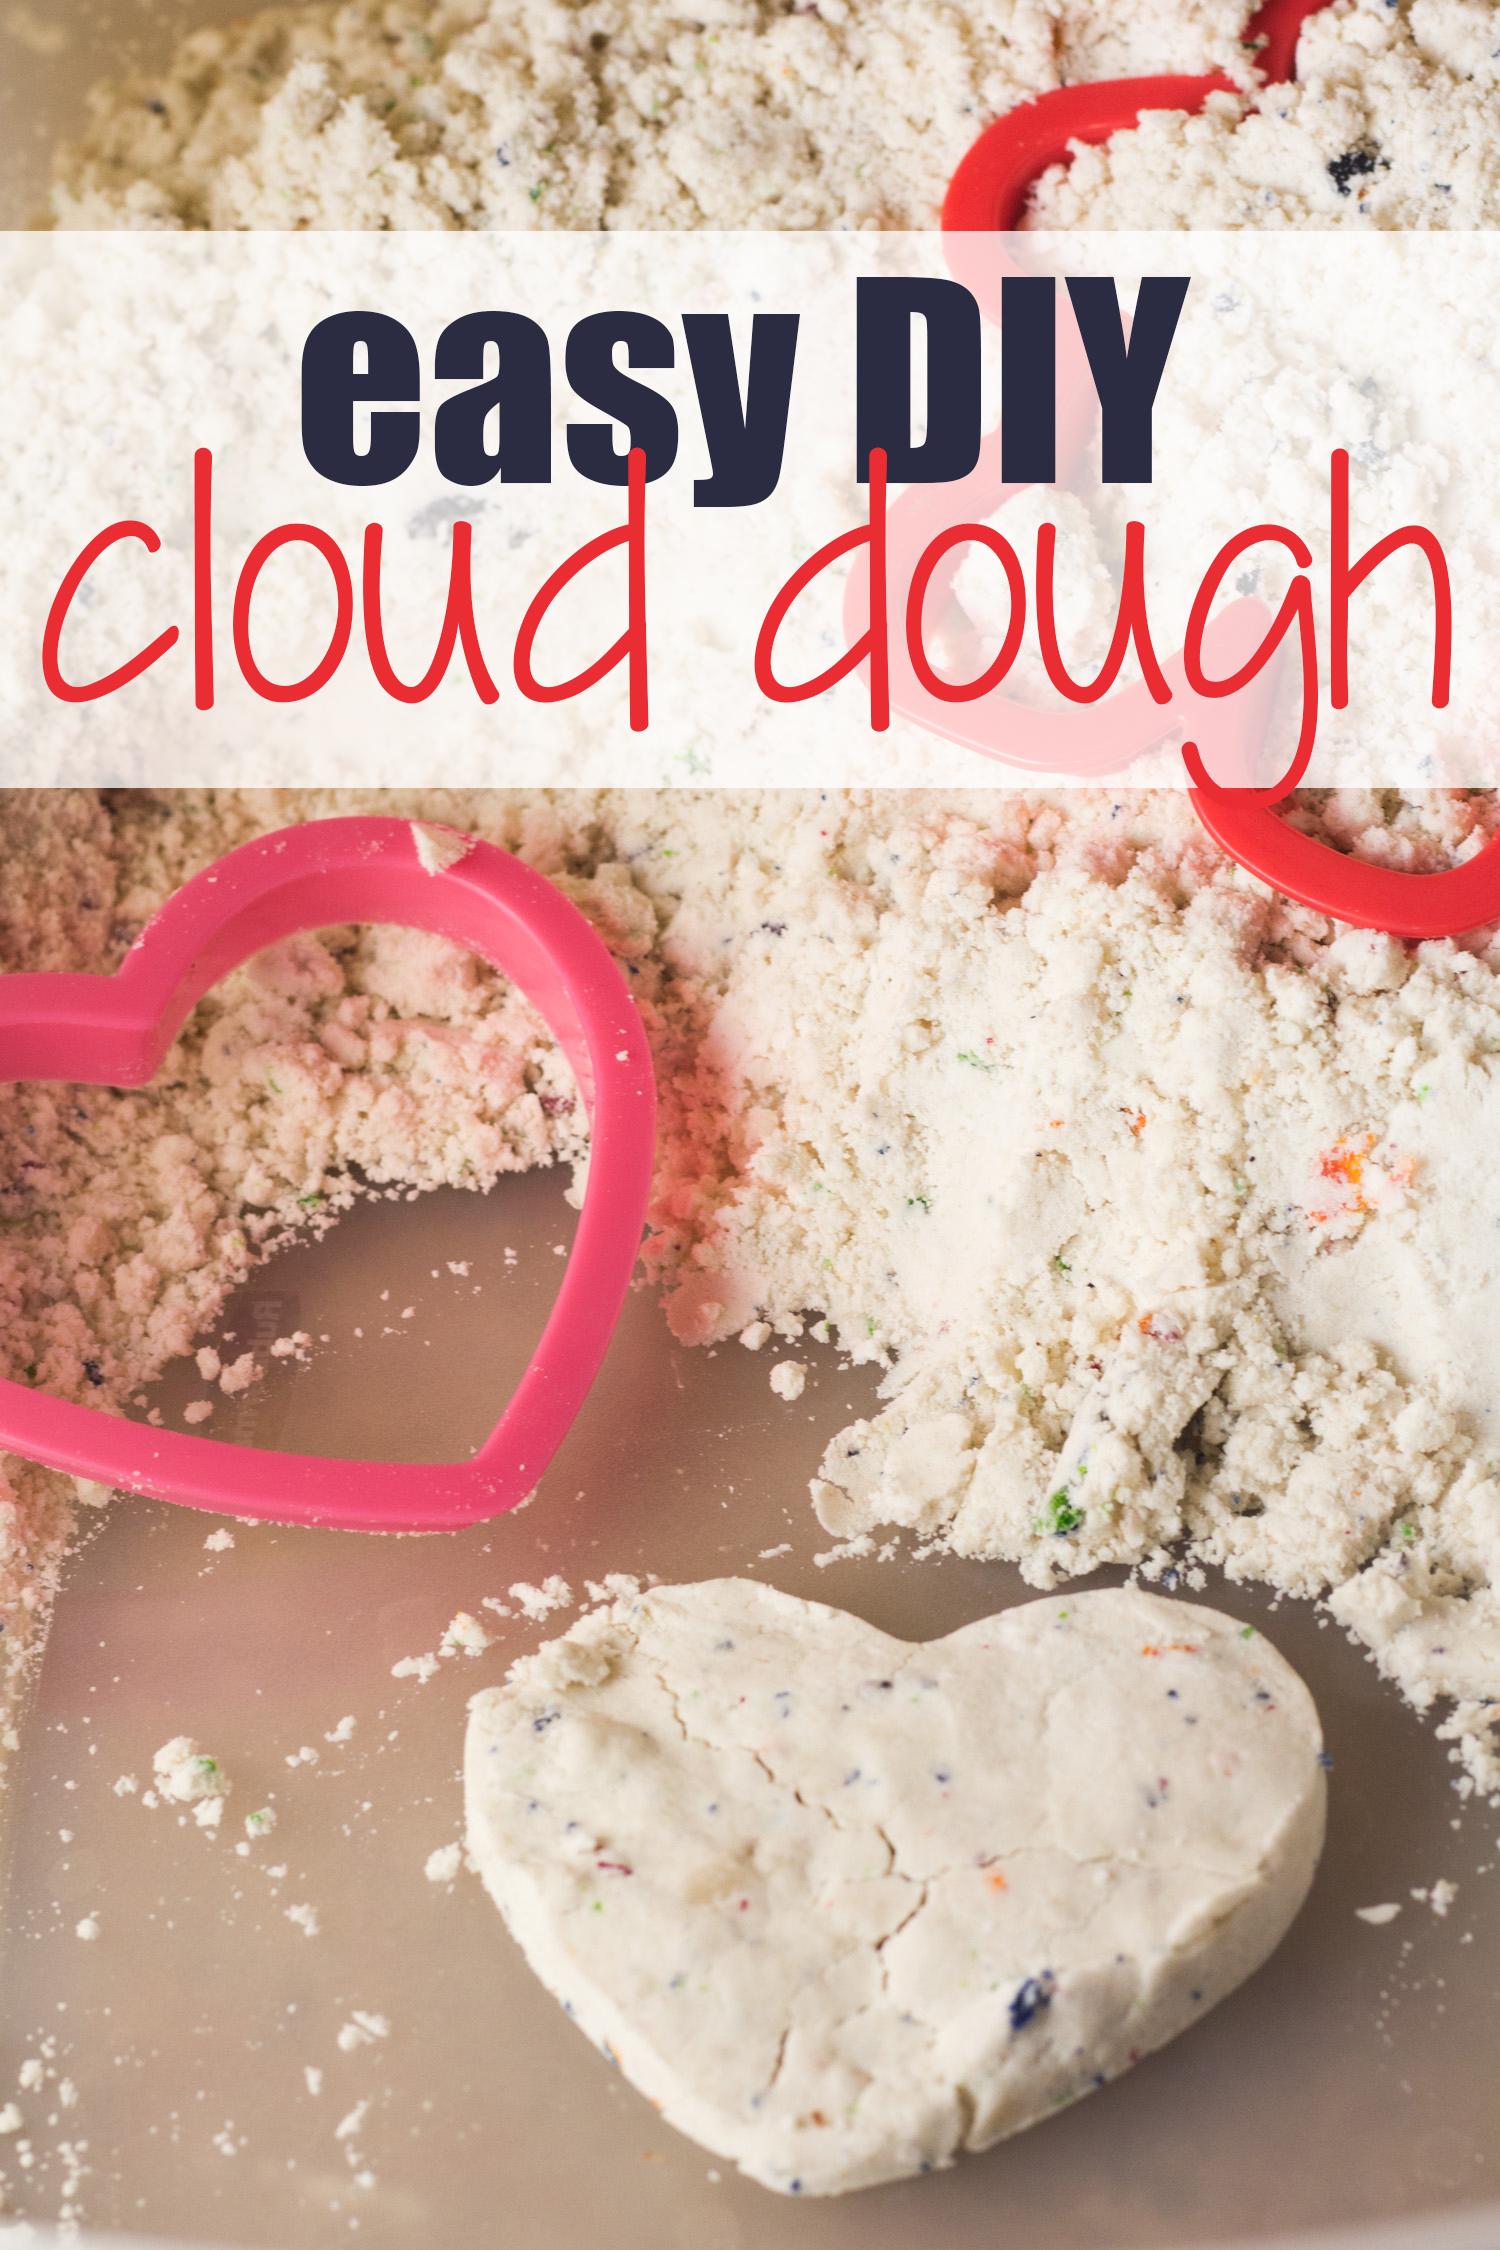 This cloud dough is so easy to make-- only 2 ingredients and less than 5 minutes of effort for a great sensory toy your kids will love. Plus, since it's safe to eat, it's okay if little fingers take a little nibble, too! DIY cloud dough | moon dough | sensory bin filler |